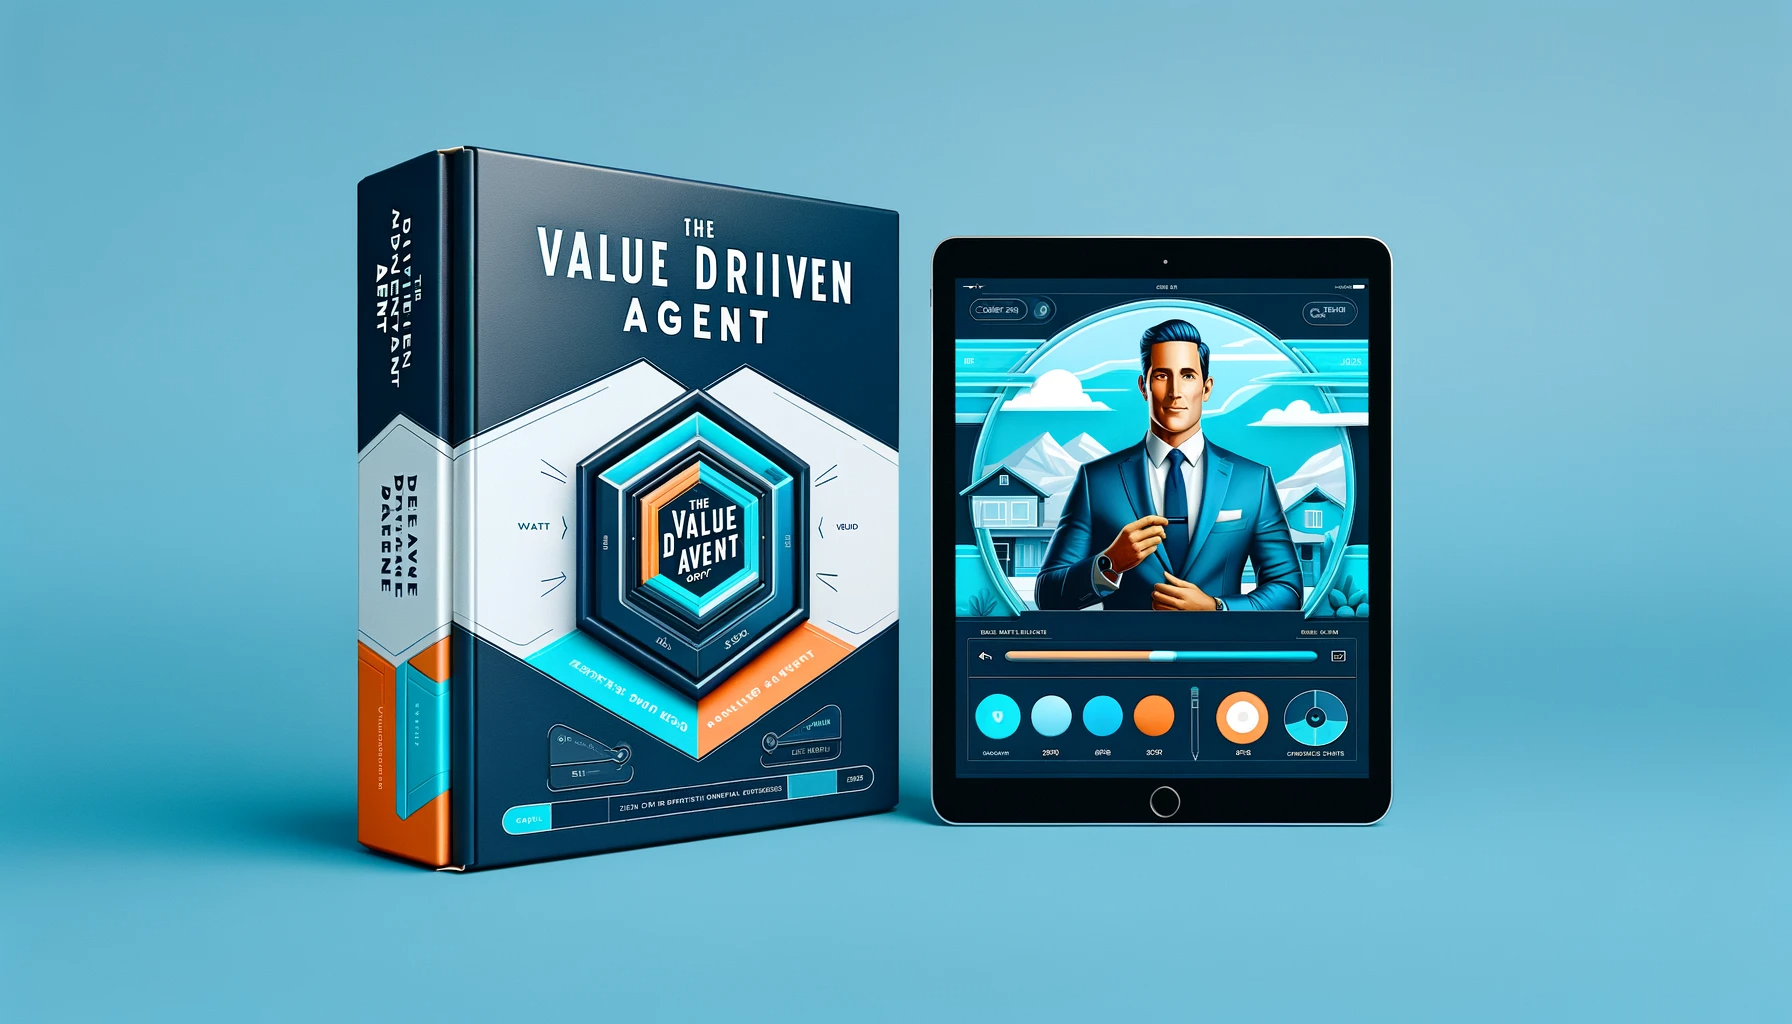 The Value Driven Agent Product